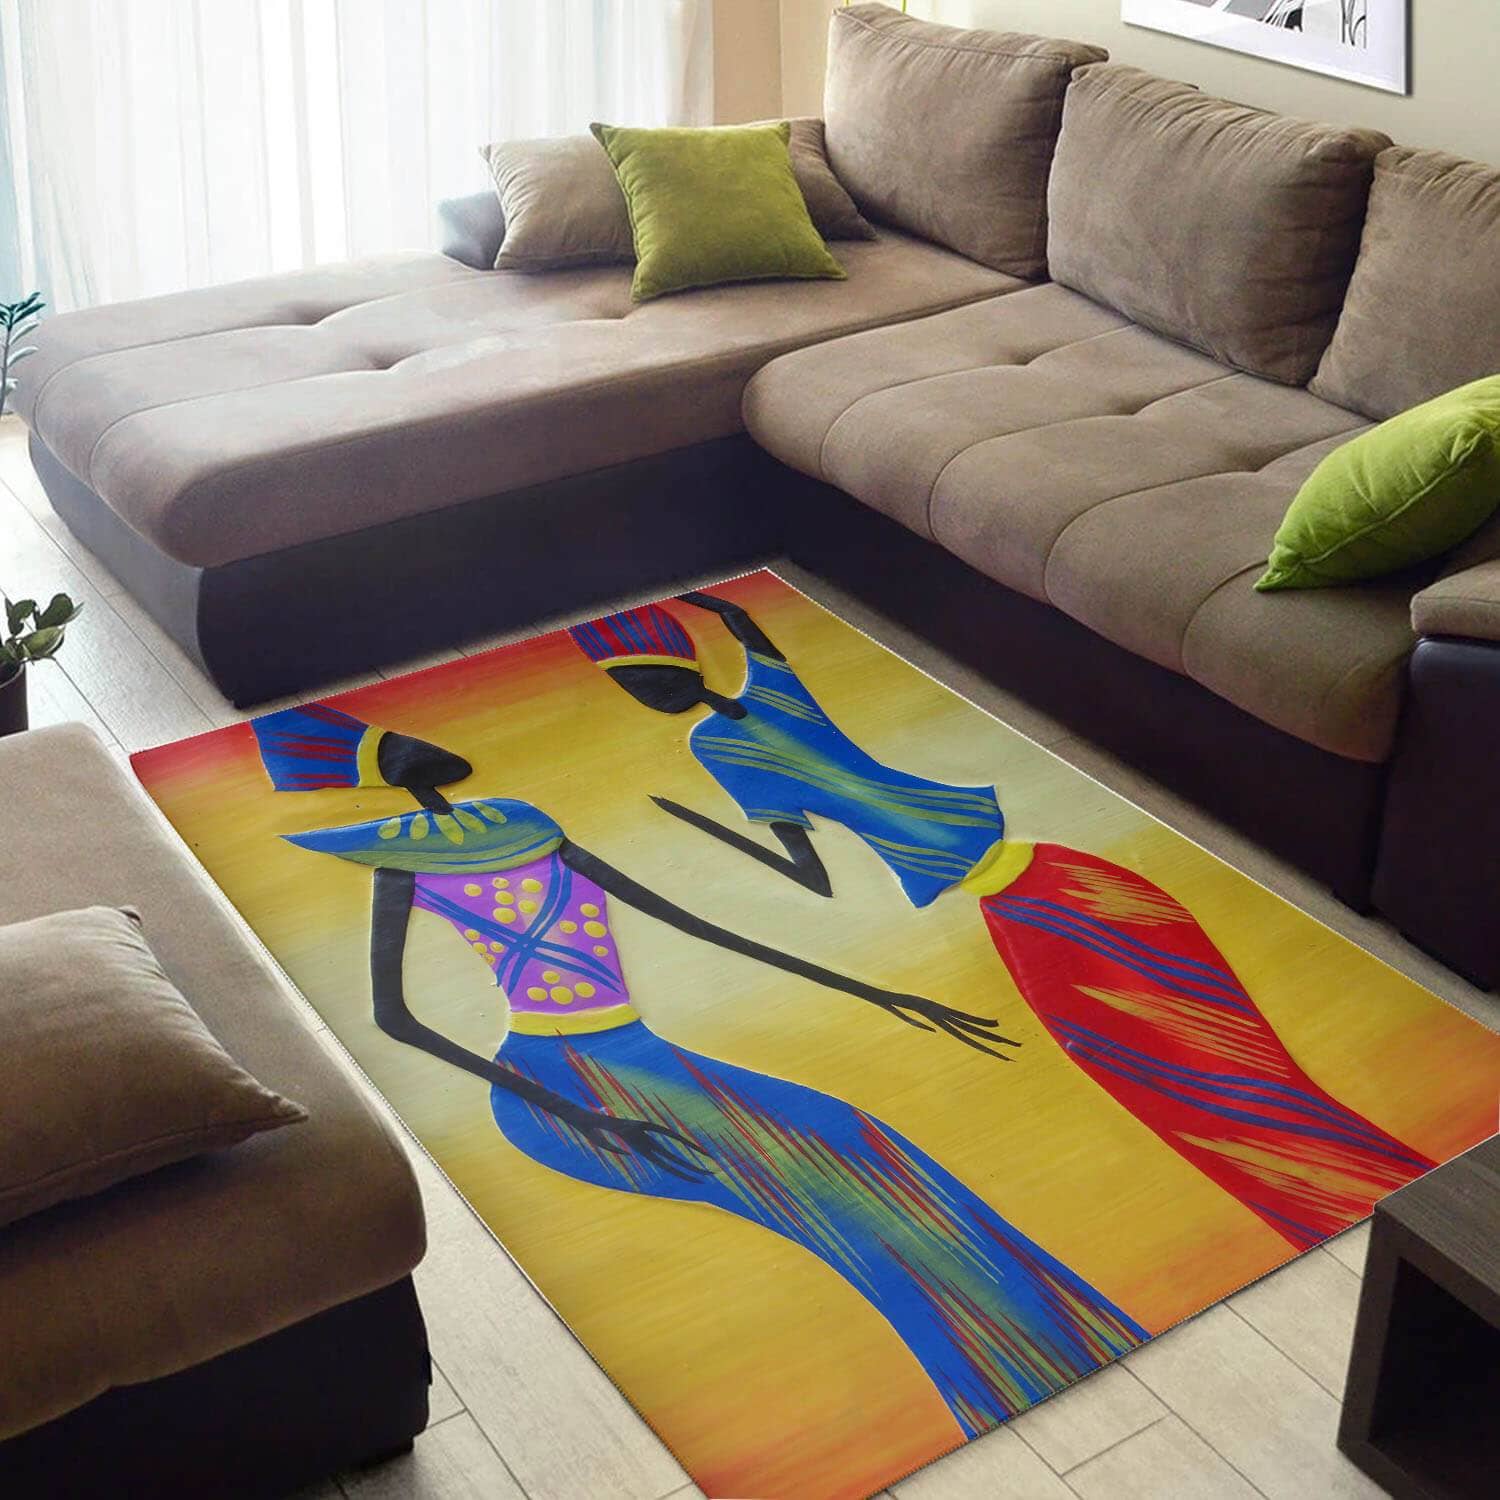 Cool African Pretty Afrocentric Afro Woman Design Floor House Rug